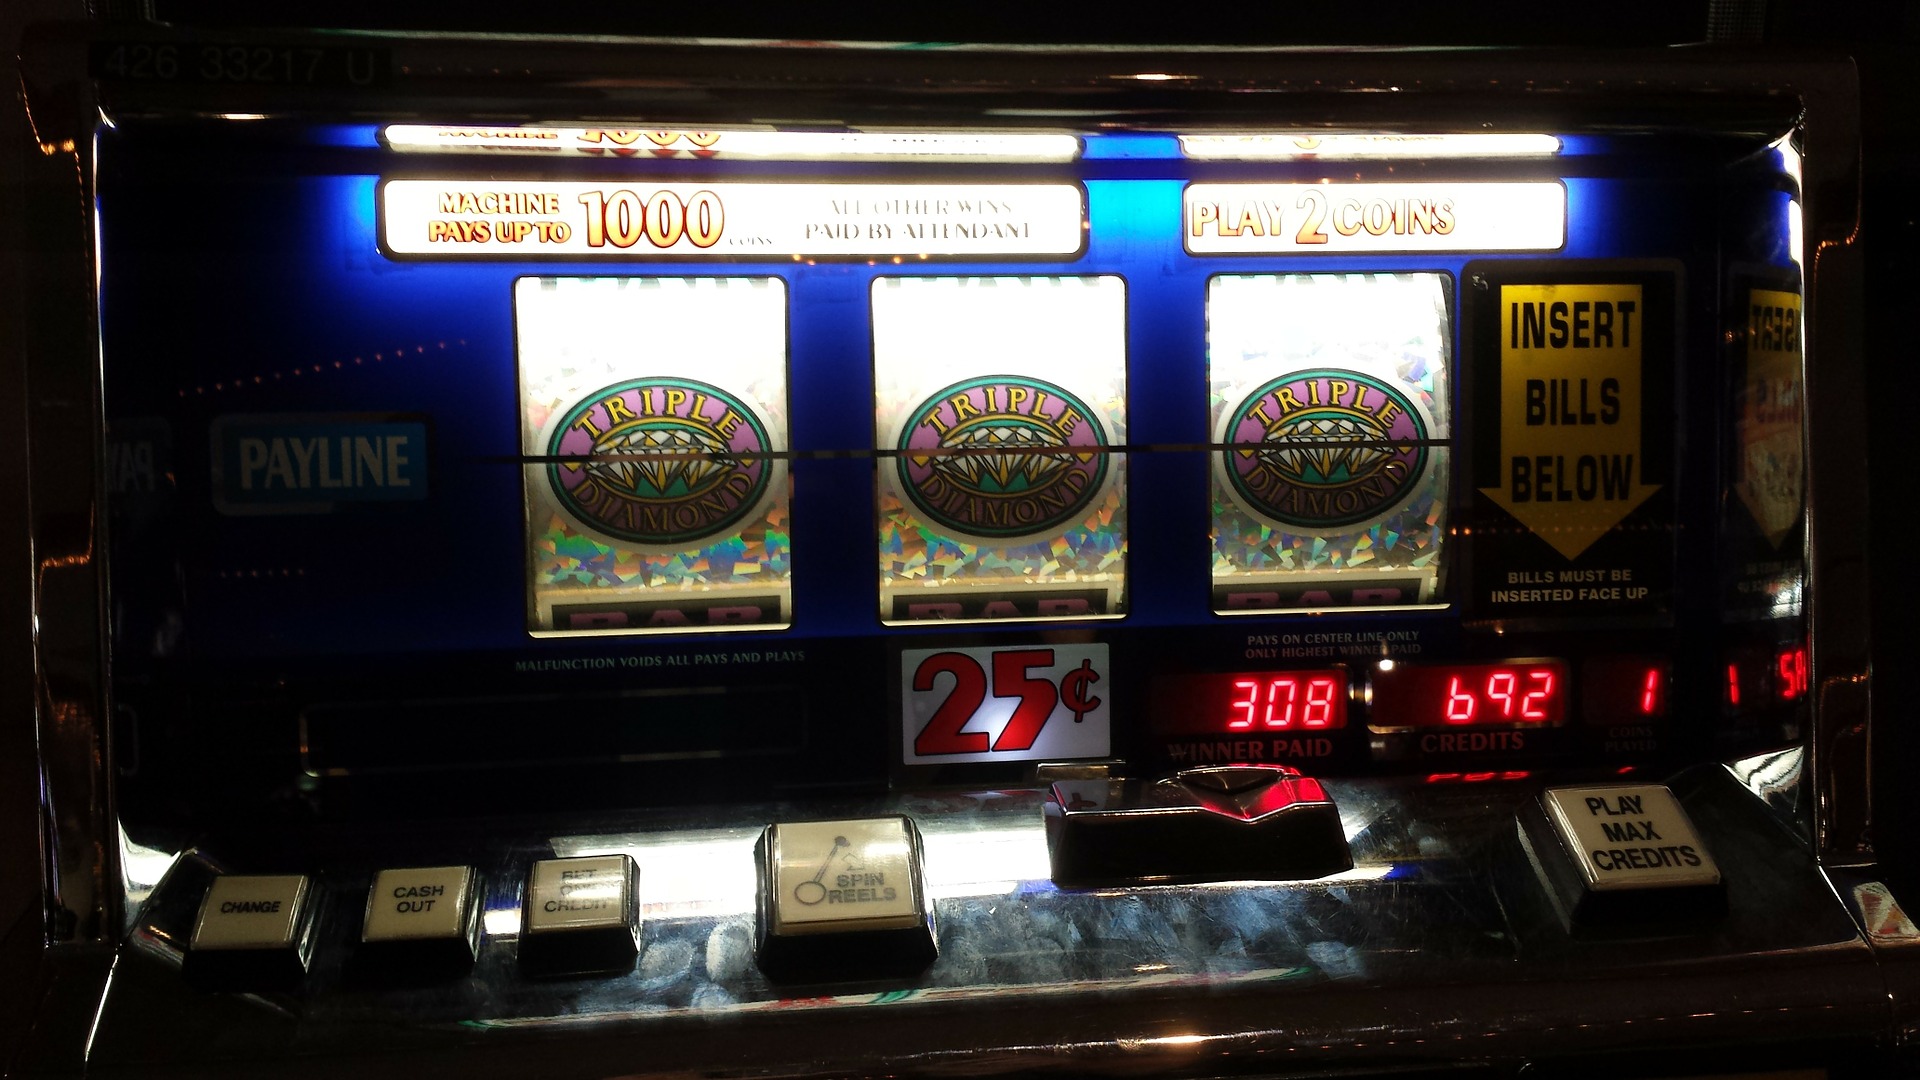 How do slot machines pay out